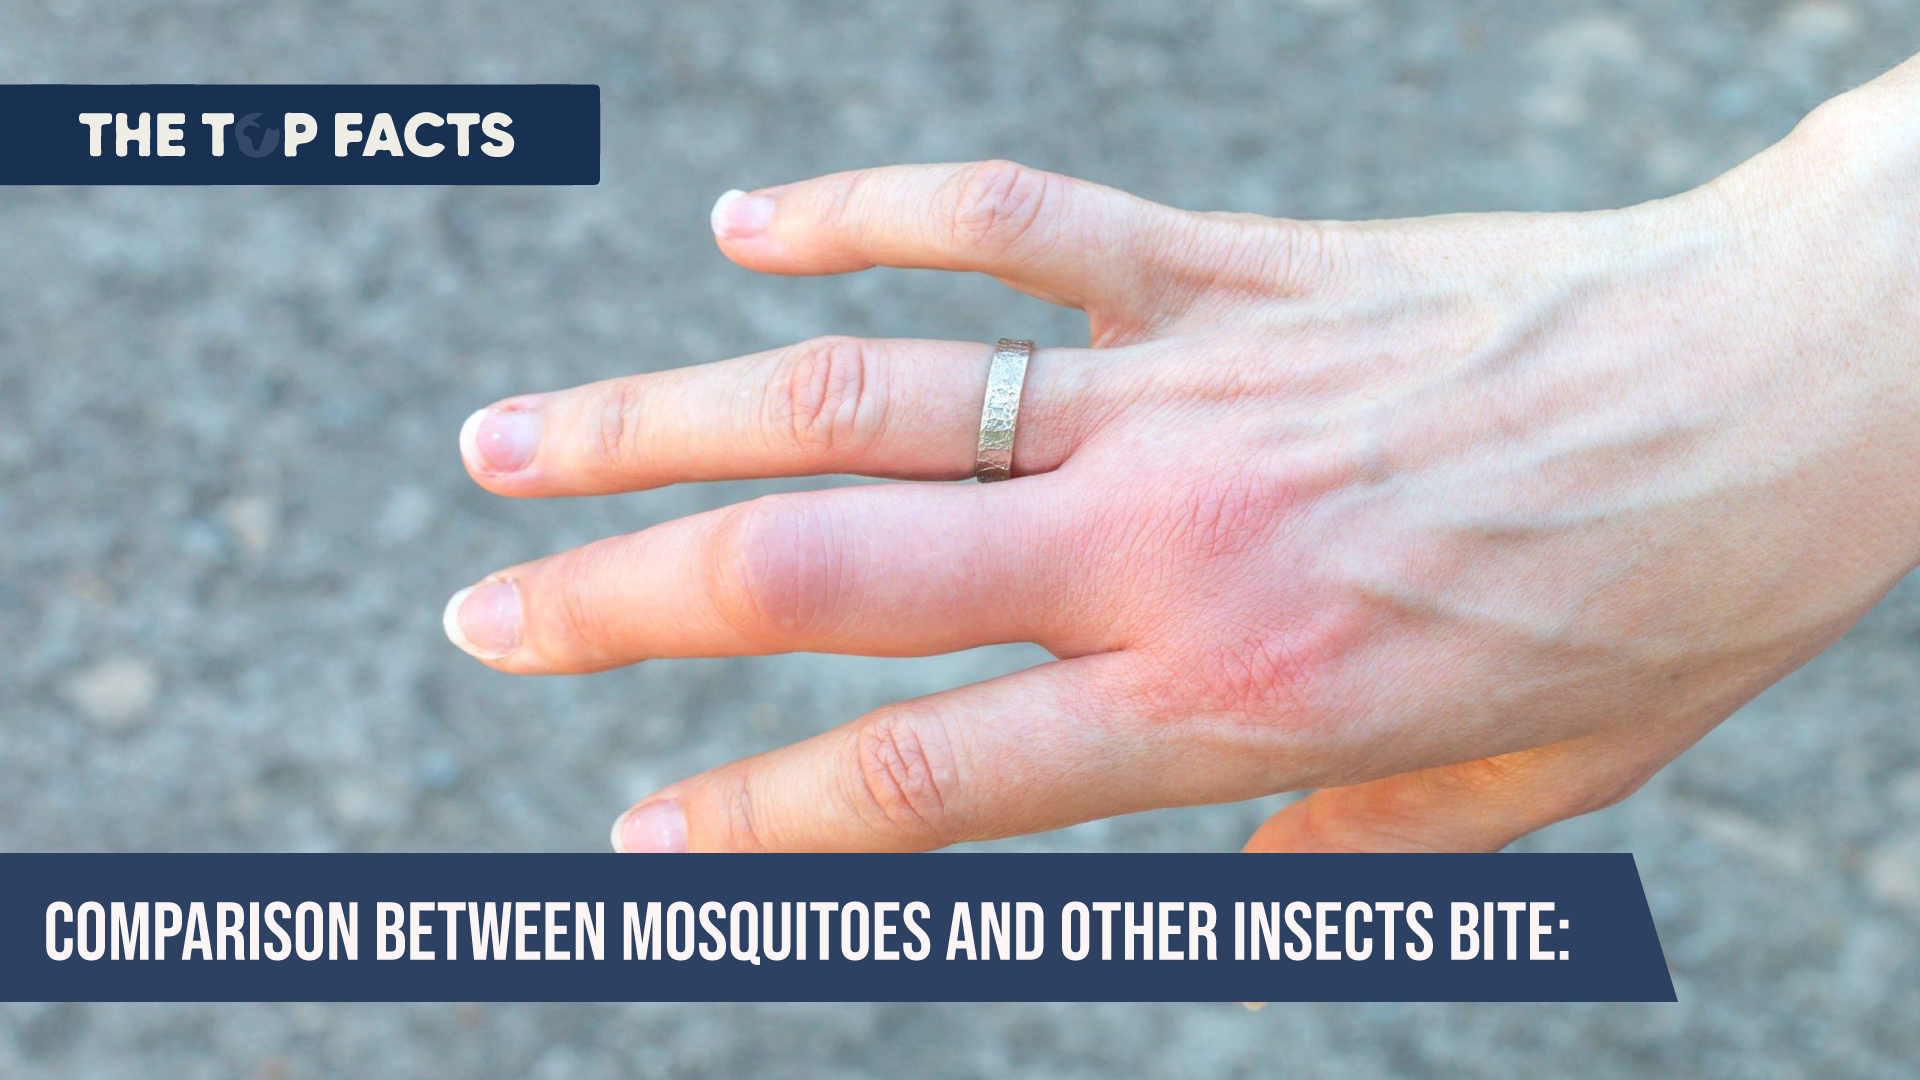 Comparison between mosquitoes and other insects bite